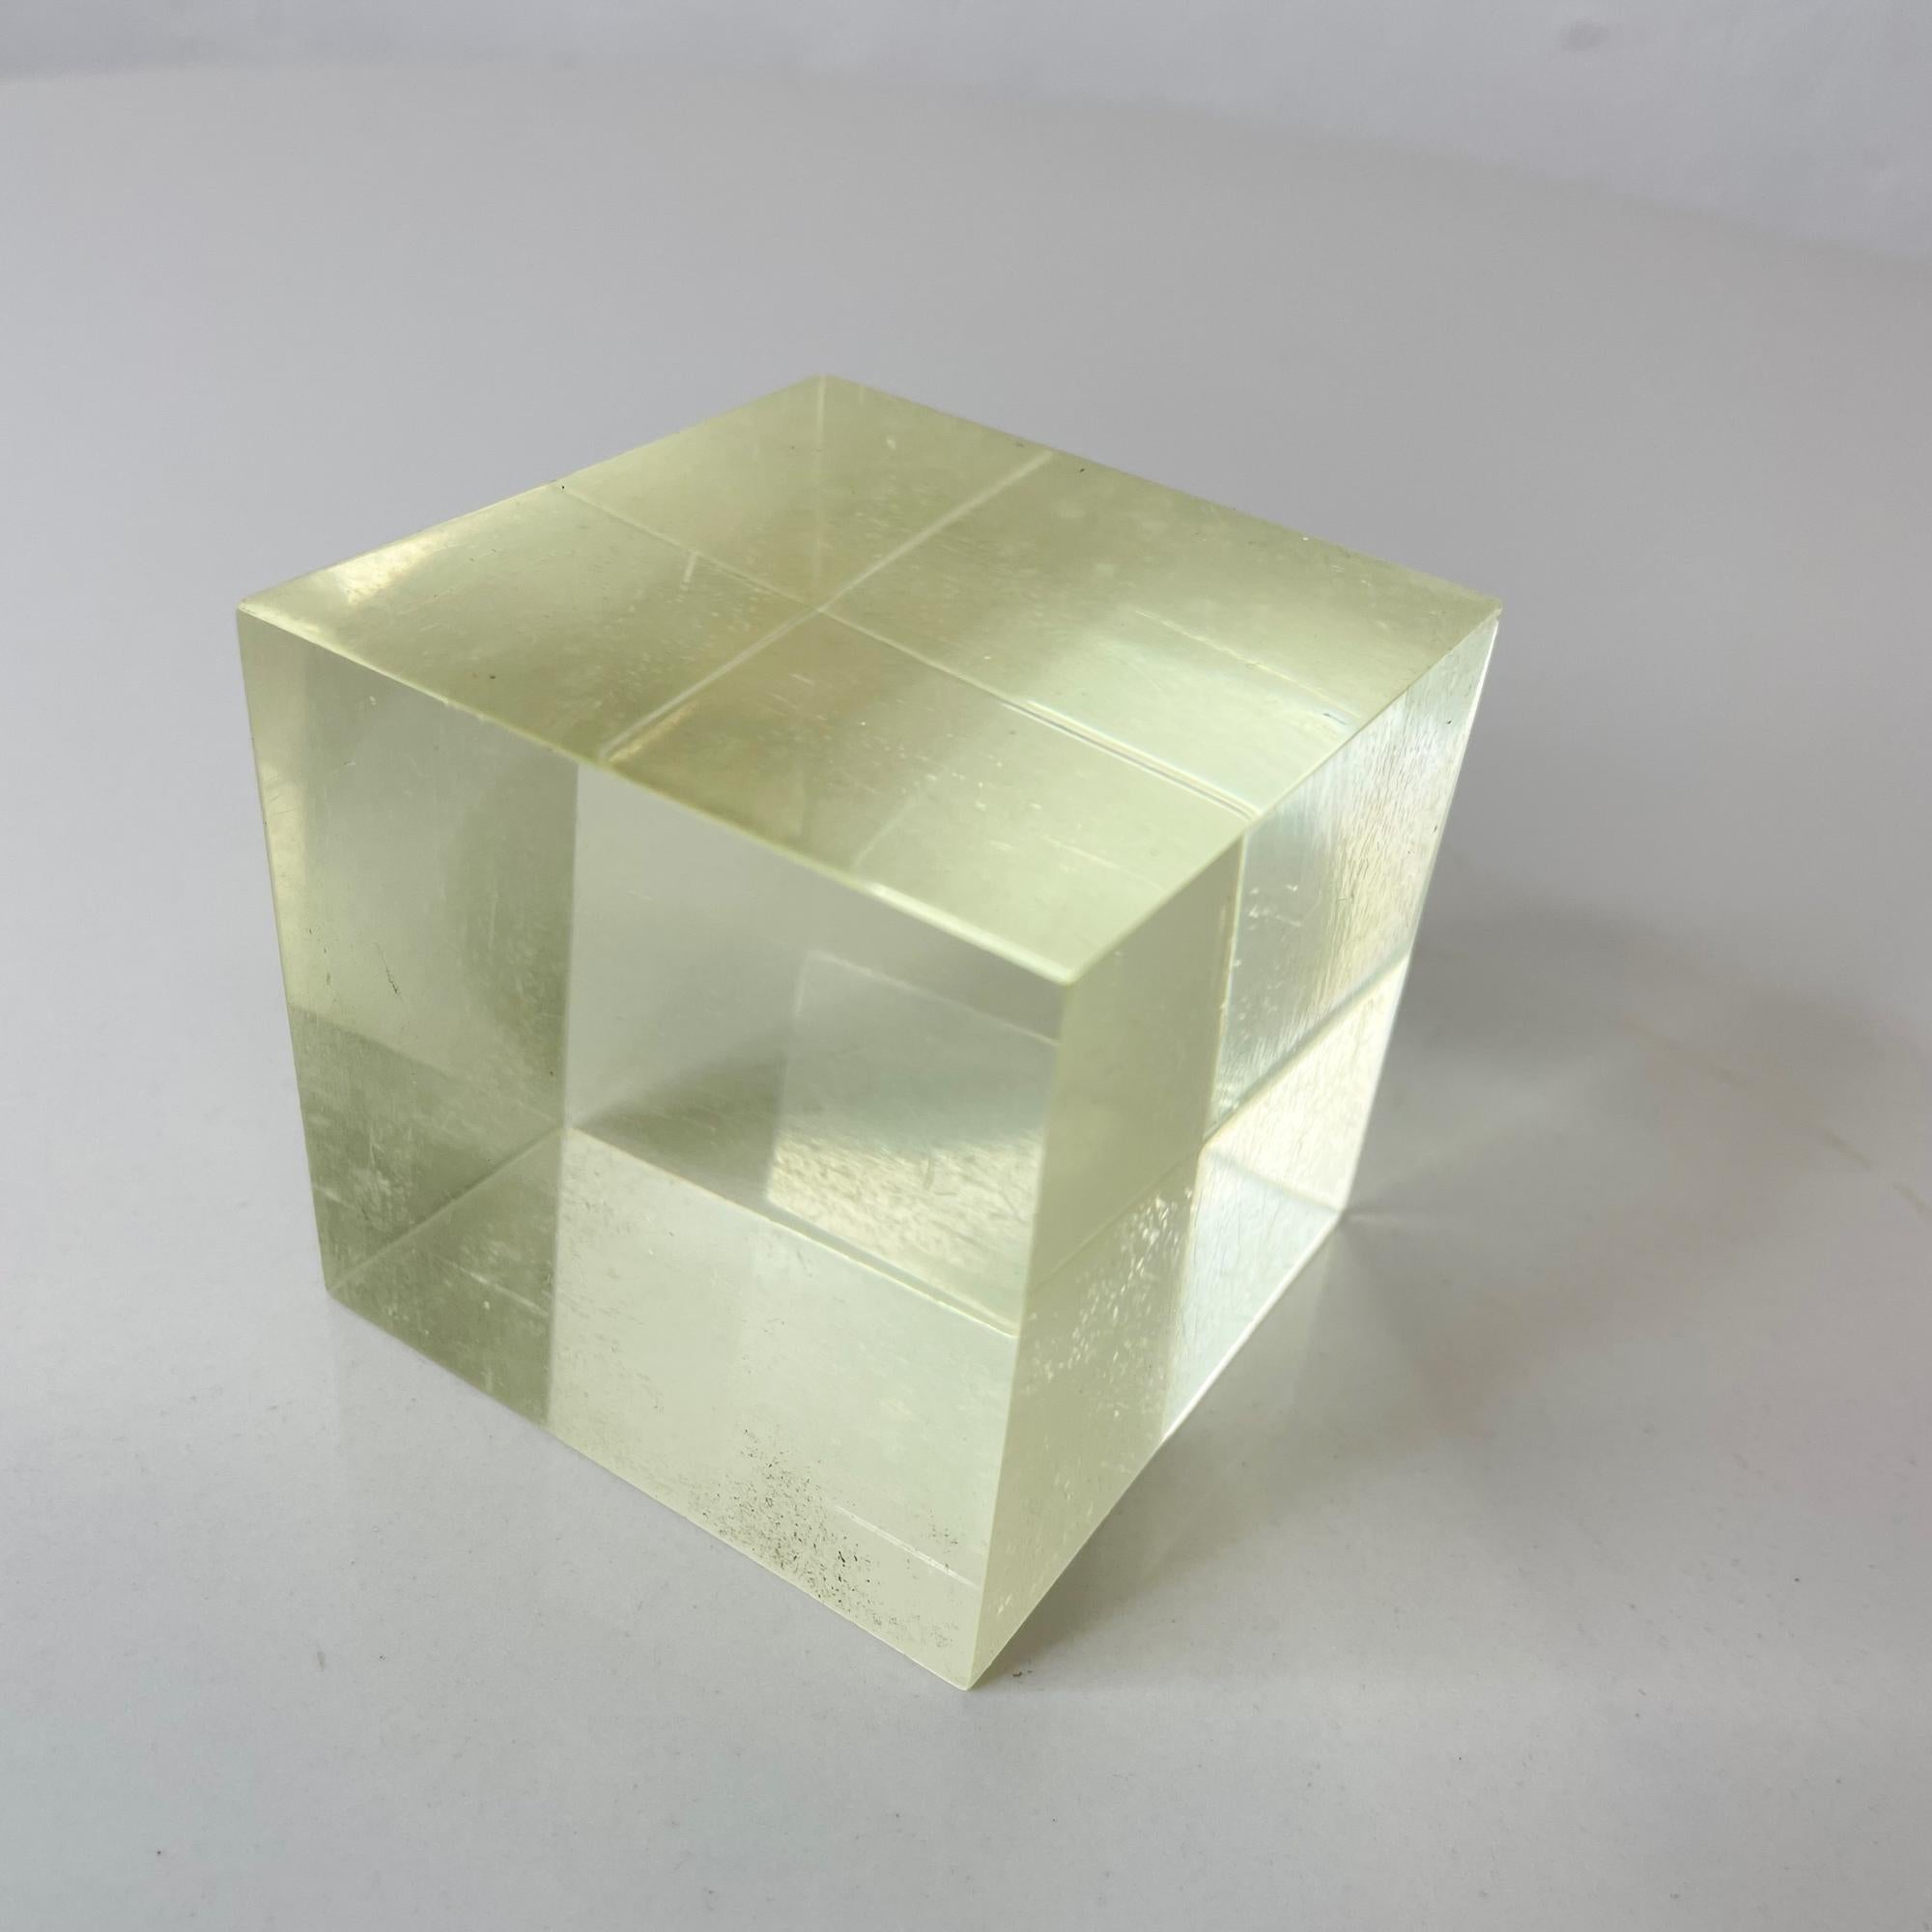 Mid-Century Modern Vintage Lucite Paperweight Geometric Cube 1970s Mod Desk Accessory